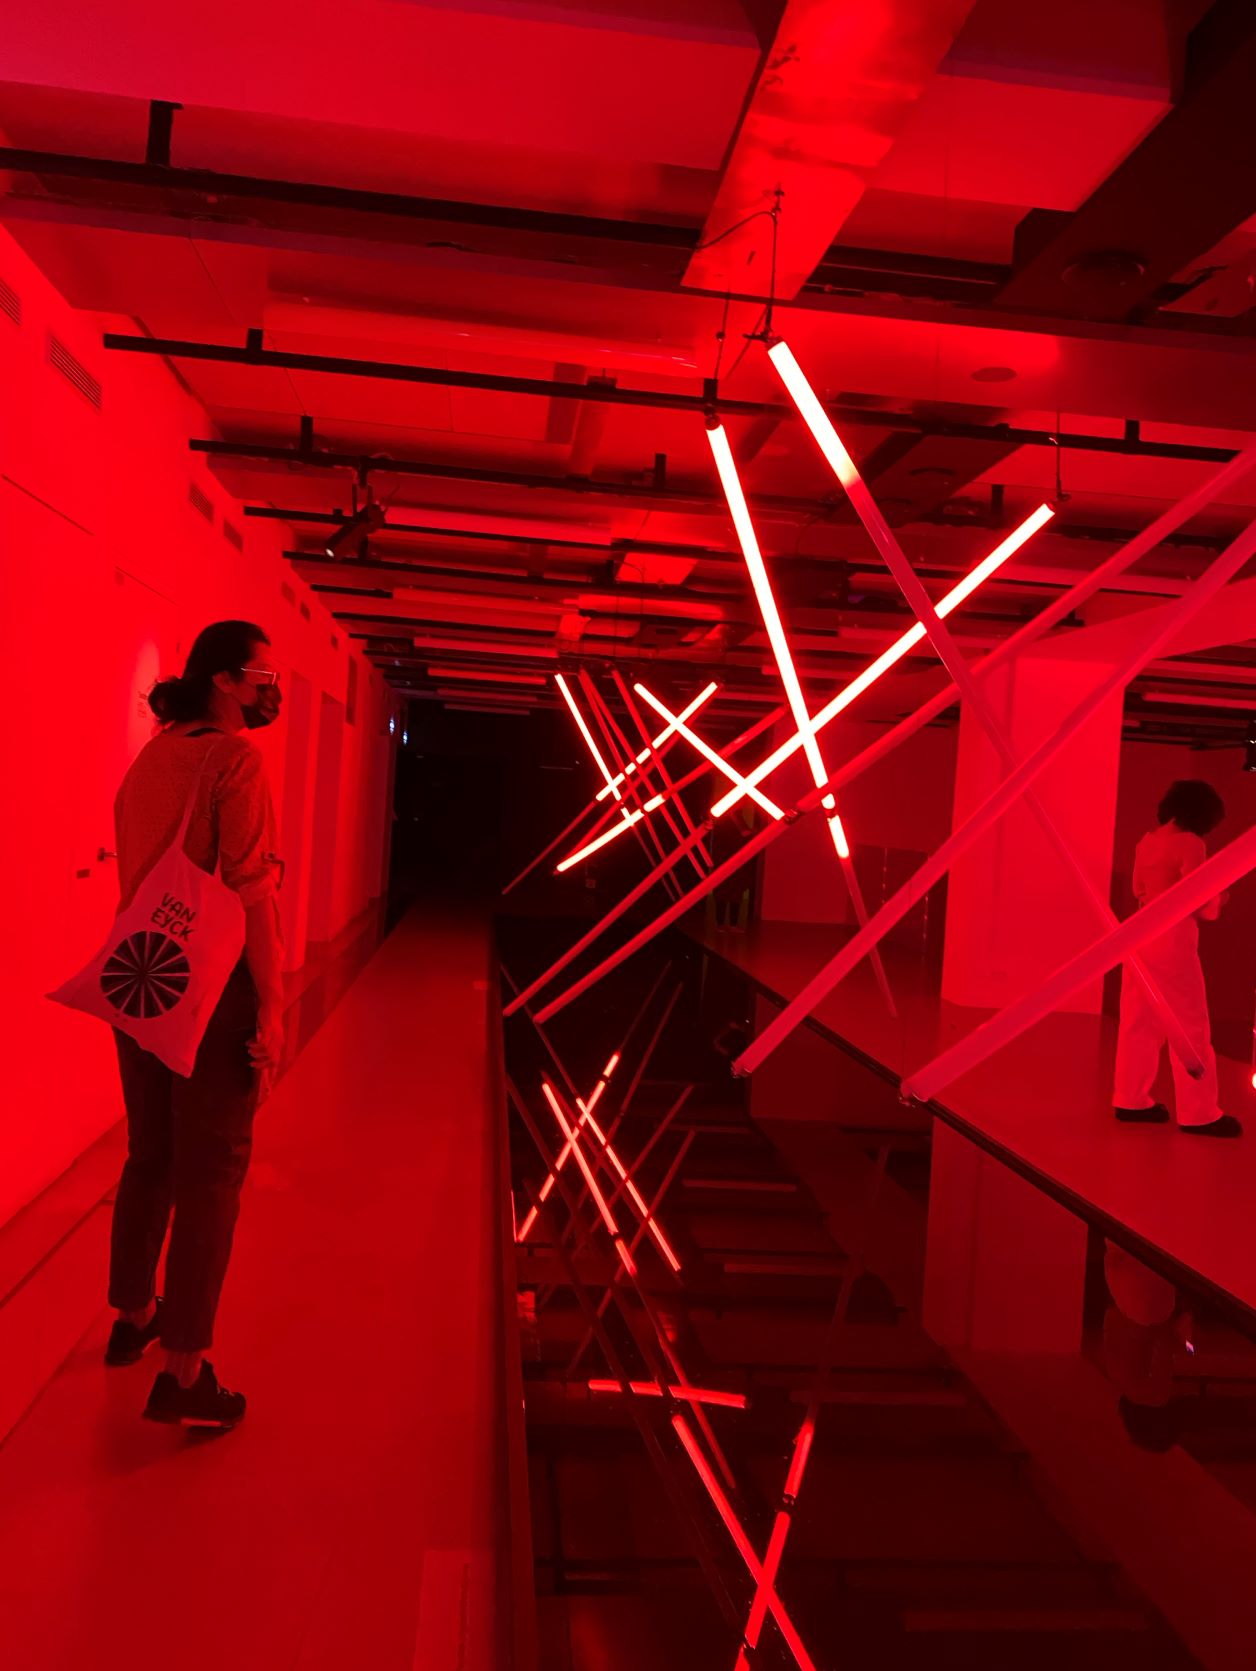 Visiting the solo exhibition of Olivier Ratsiy at La Gaîté Lyrique. The works provide viewers with a multi-sensory experience through light, shadows, and colors.